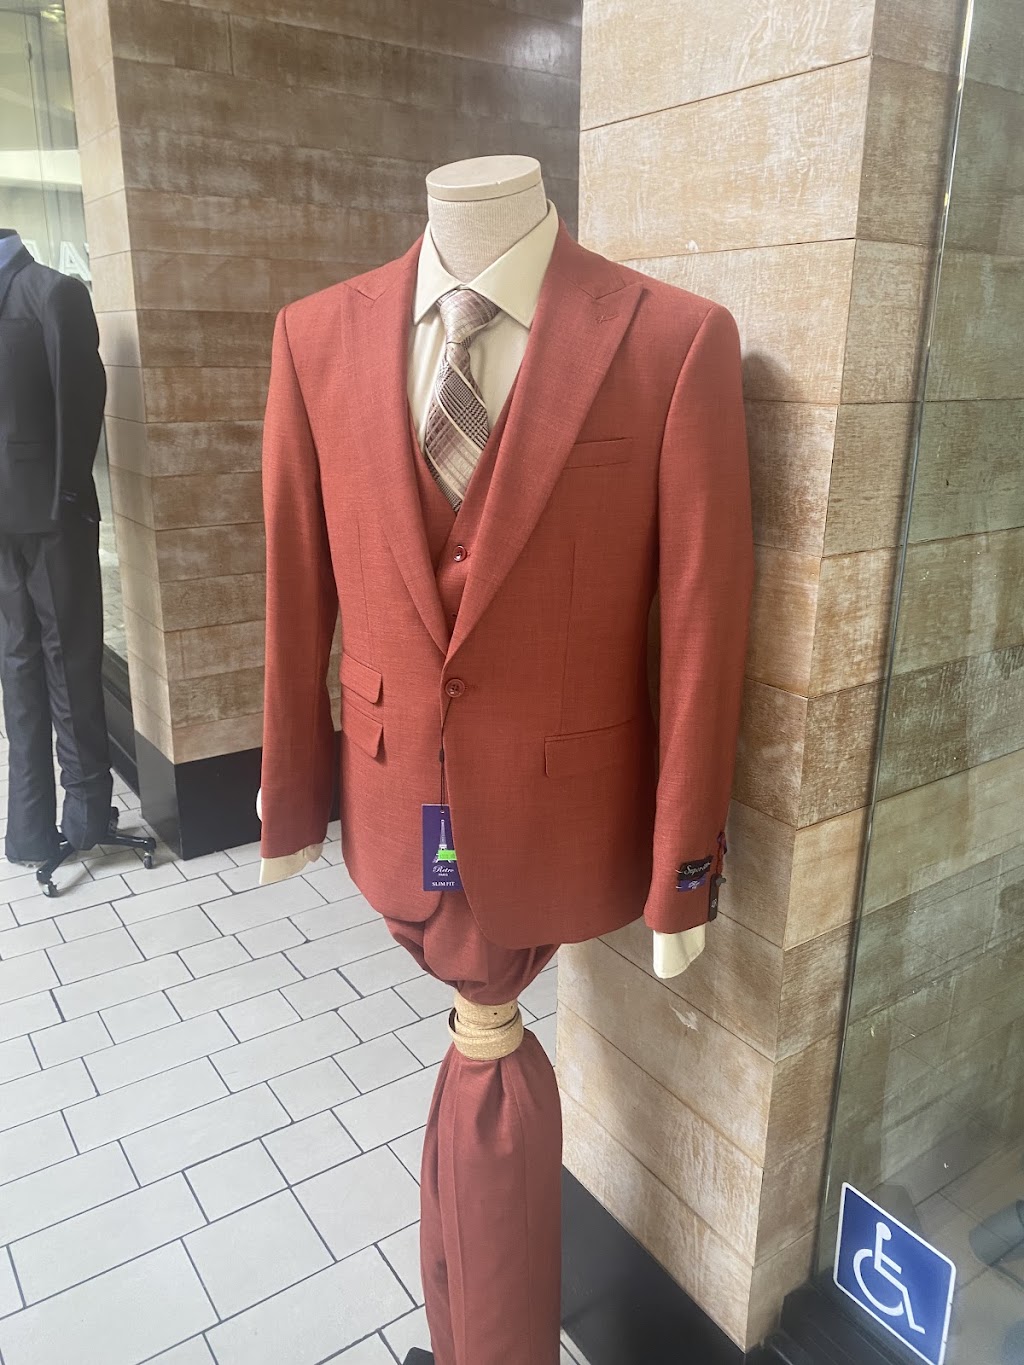 FT-SUITS | 2550 Somersville Rd, Antioch, CA 94509 | Phone: (925) 754-1462